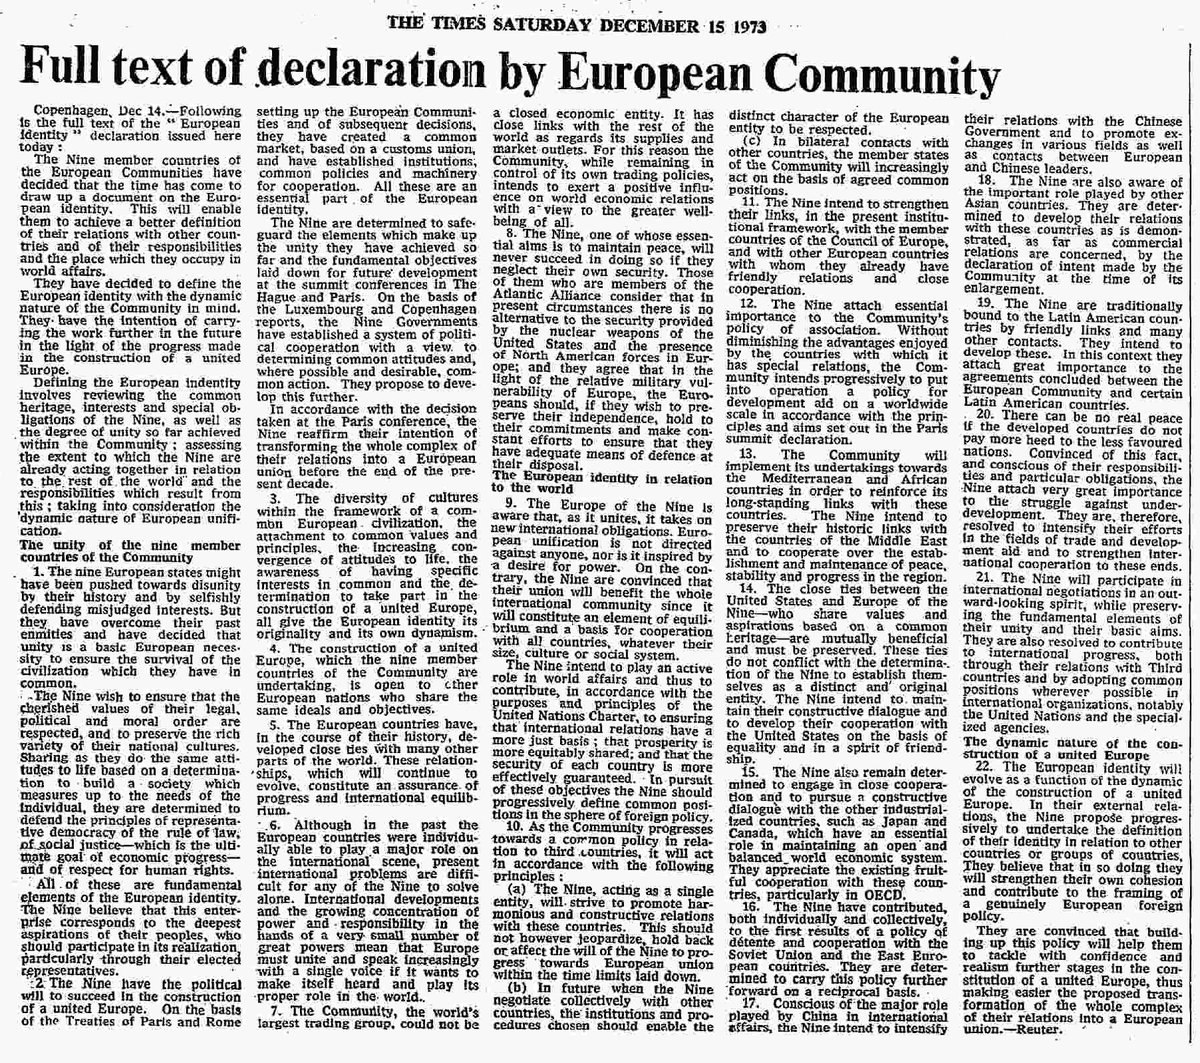 December 15th, 1973: In accordance with the decision take at the Paris conference, the Nine reaffirm their intention of transforming their relations into a European union before the end of the present decade.